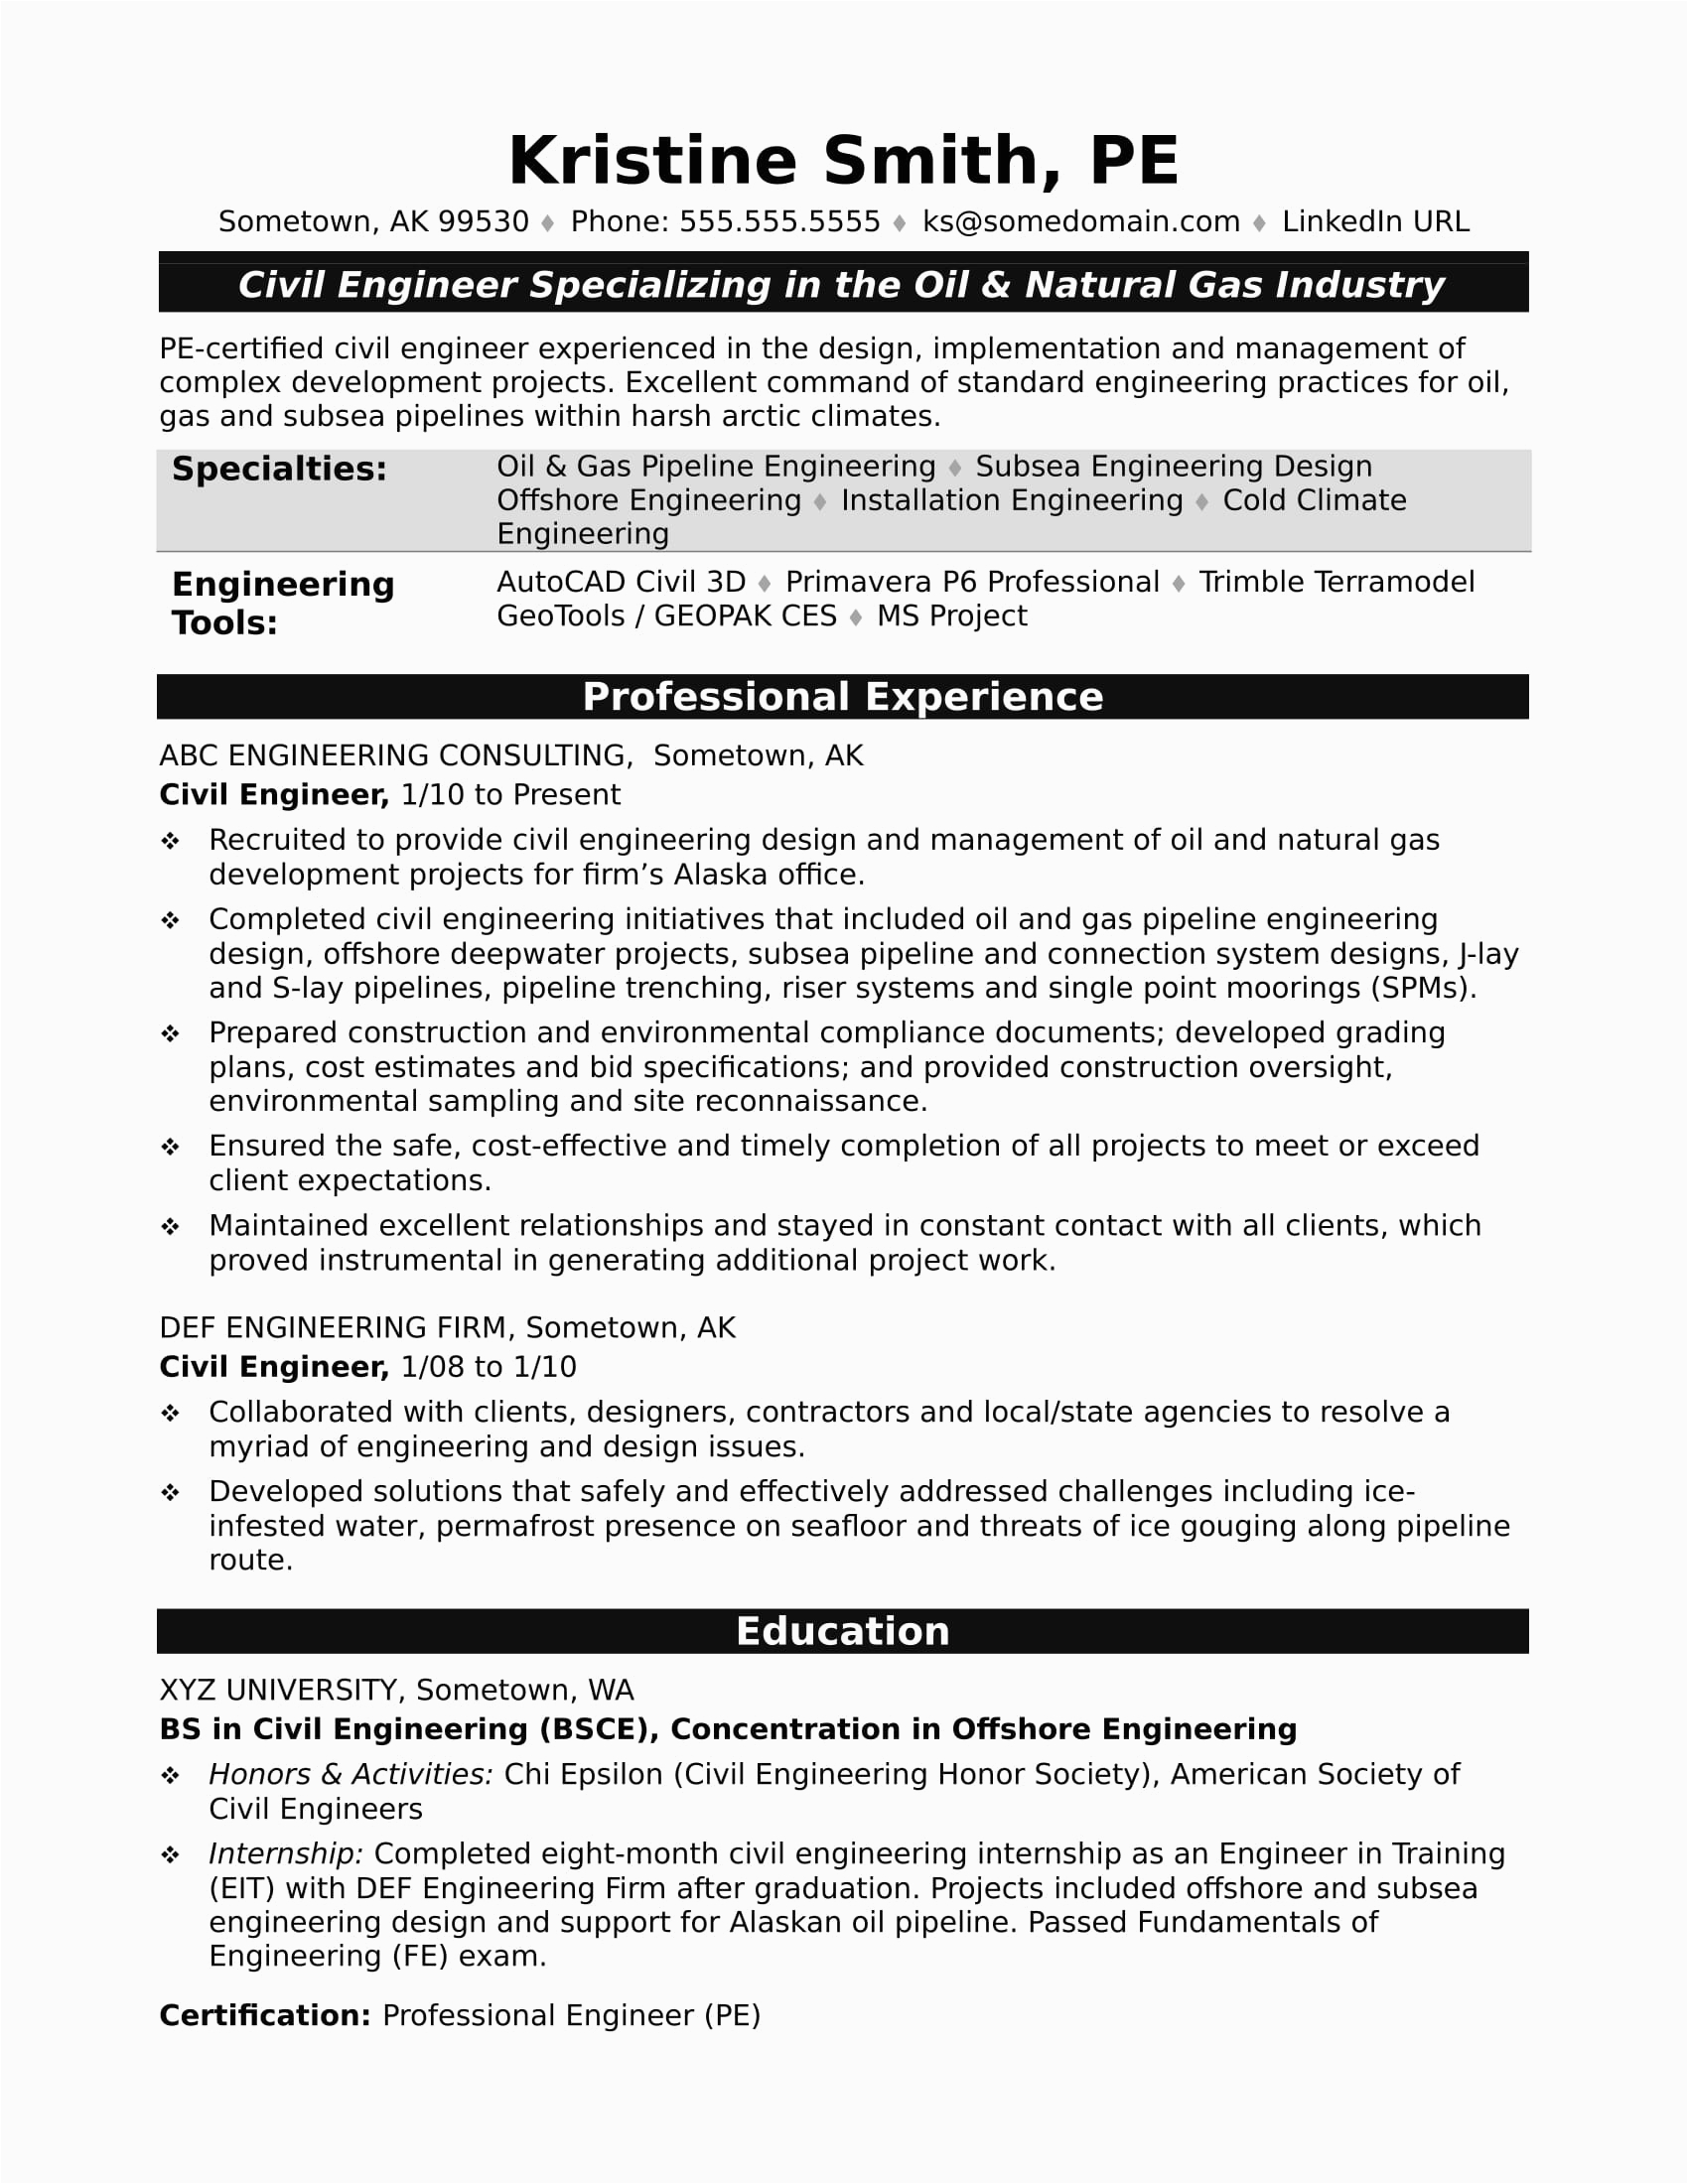 Free Resume Templates for Civil Engineers Sample Resume for A Midlevel Civil Engineer